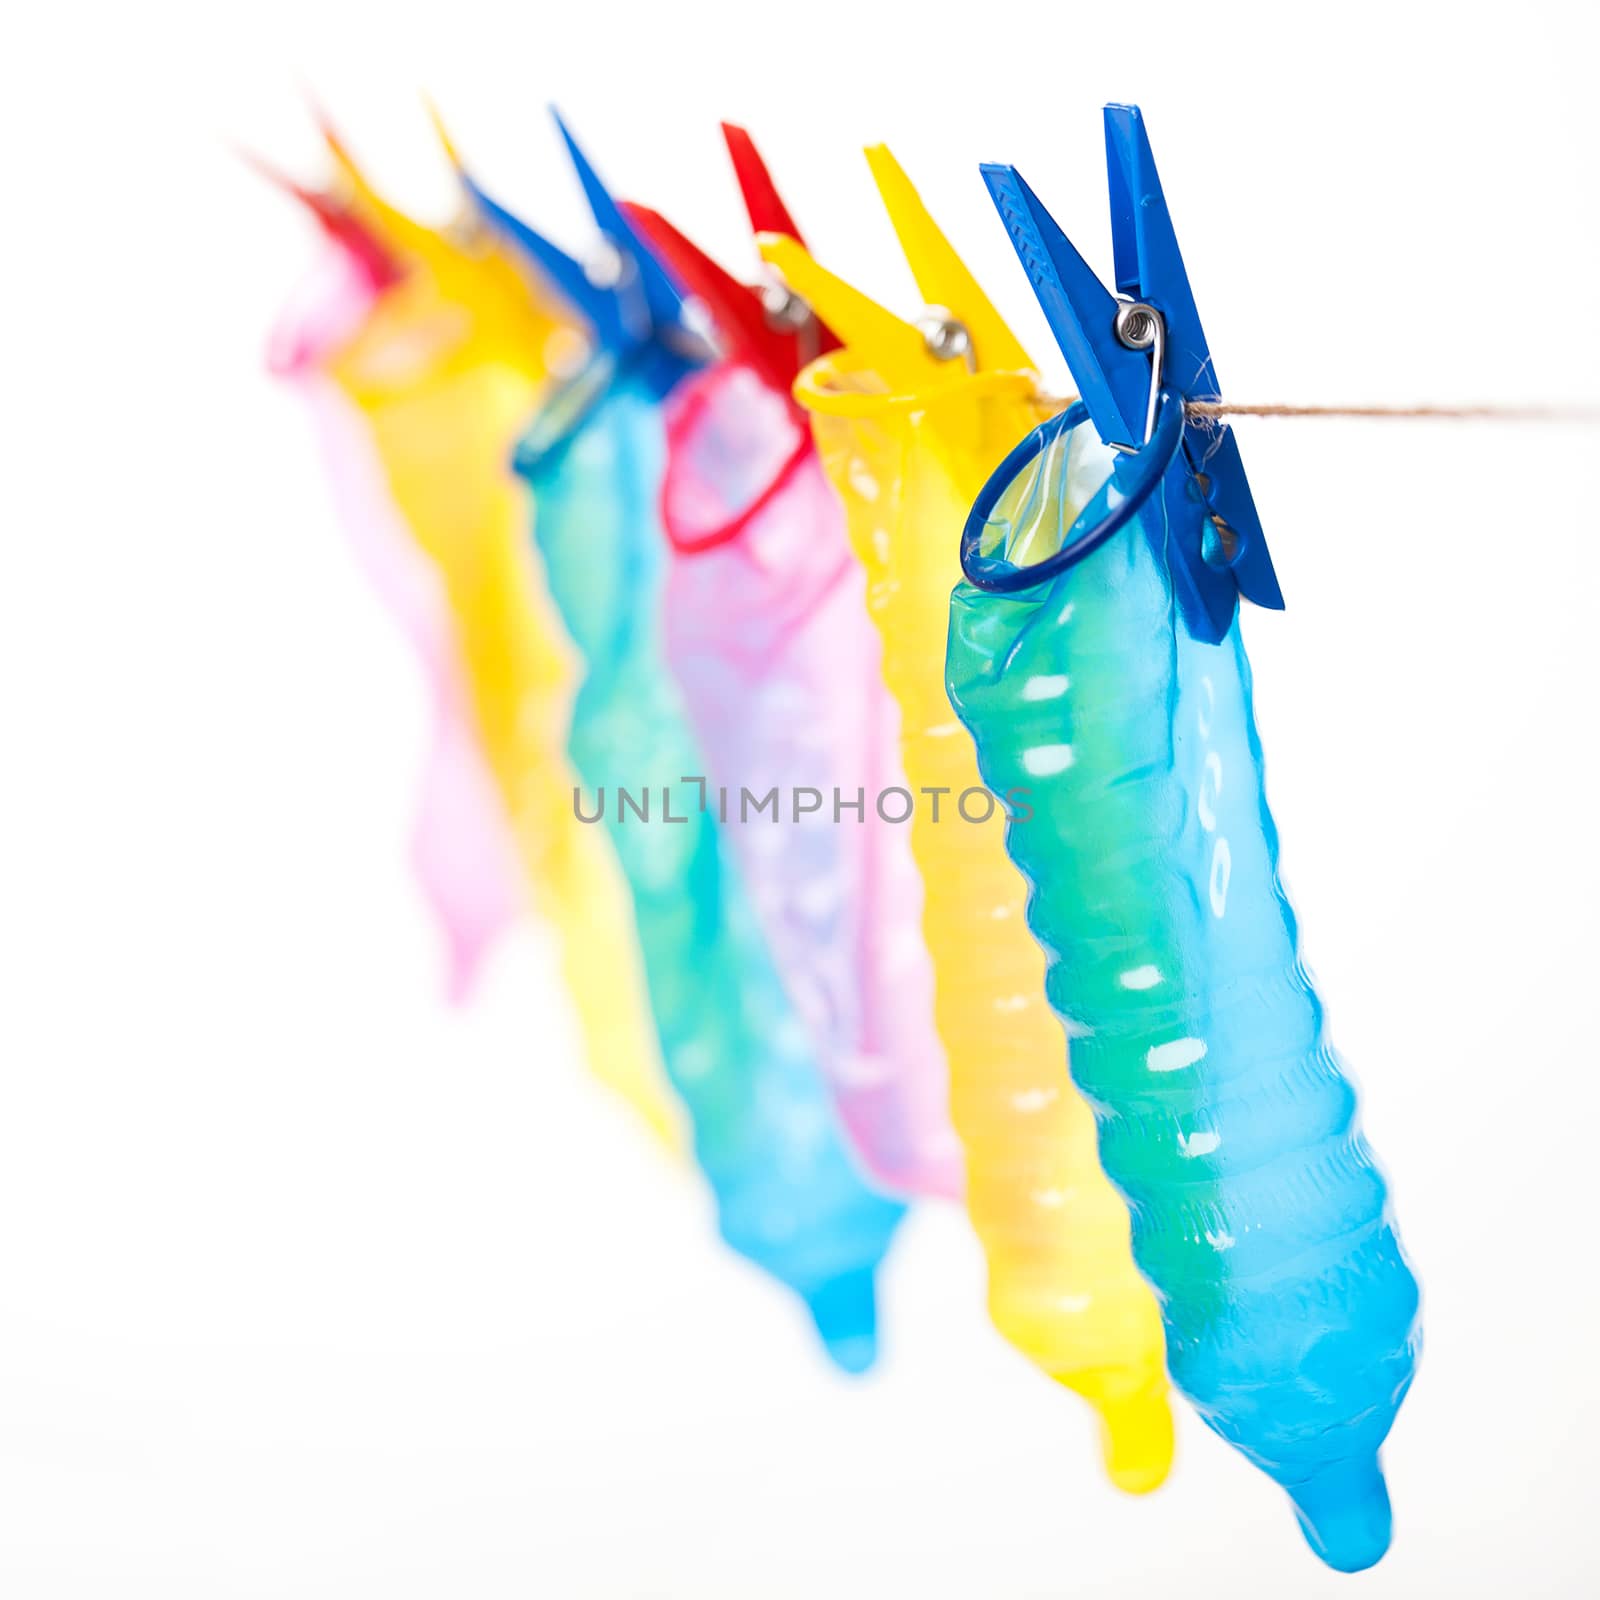 Colorful condoms on a clothespins by rufatjumali